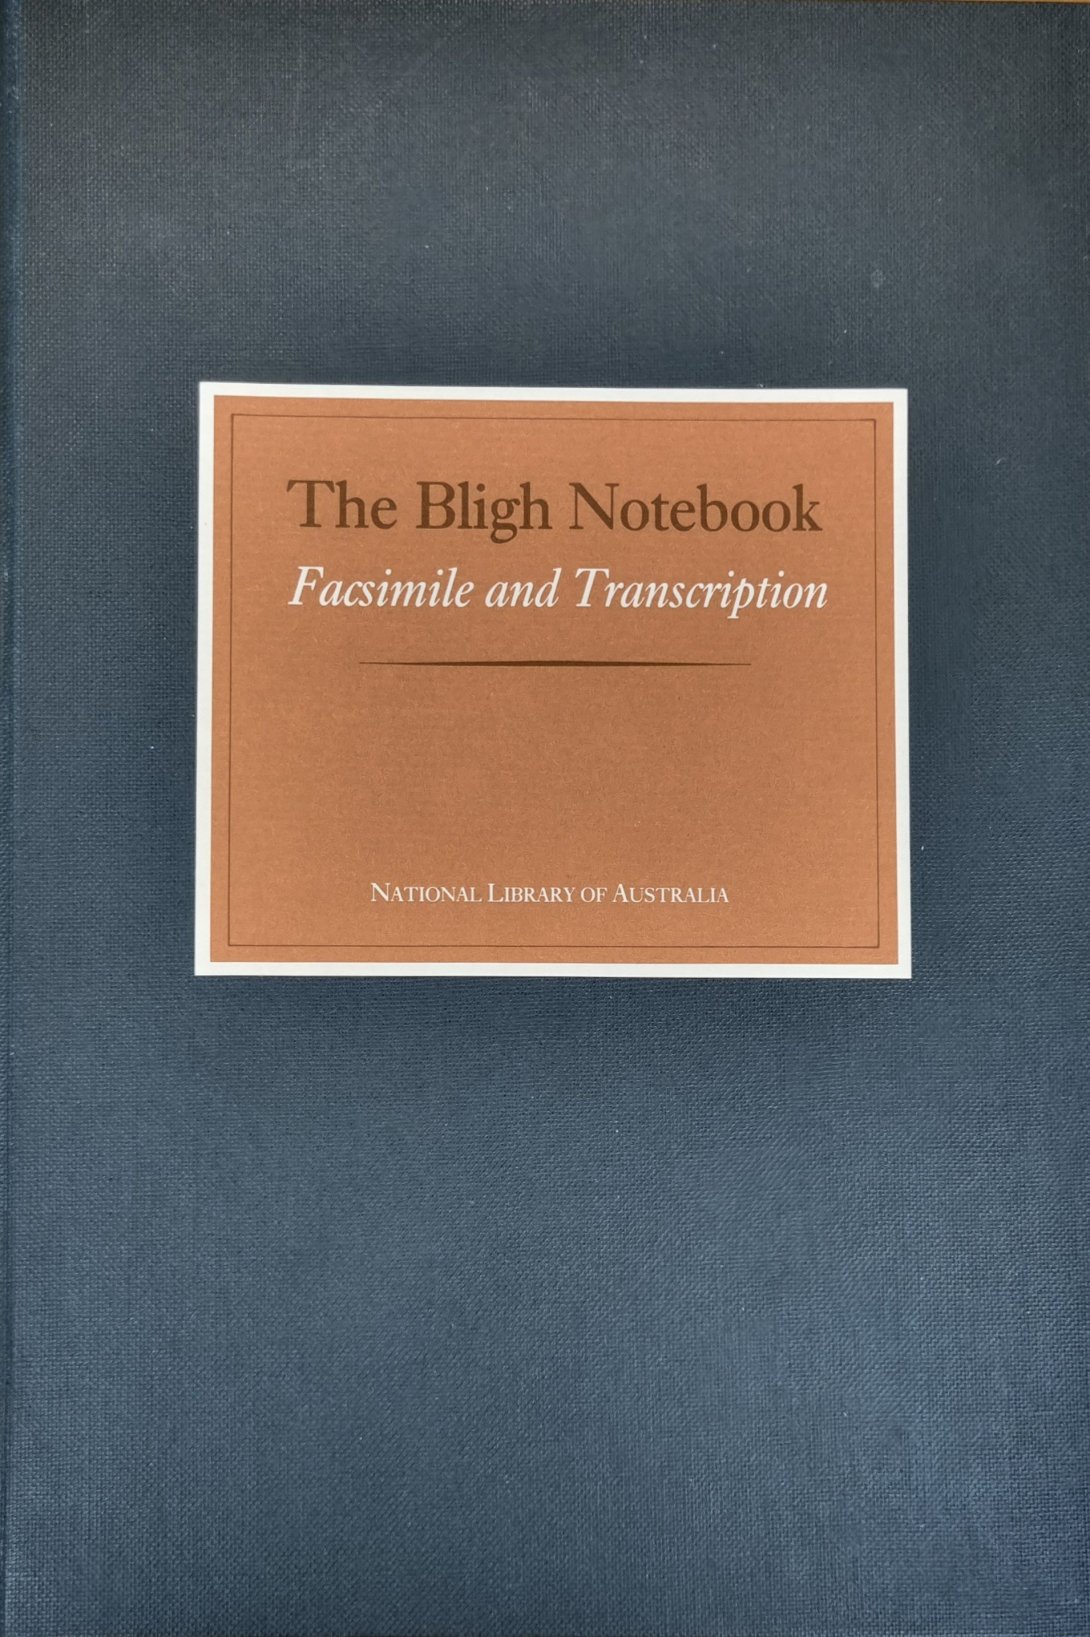 The Blight Notebook book cover. A navy background with a tan square in the centre with text 'The Blight Notebook Facimile and Transcription, National Library of Australia